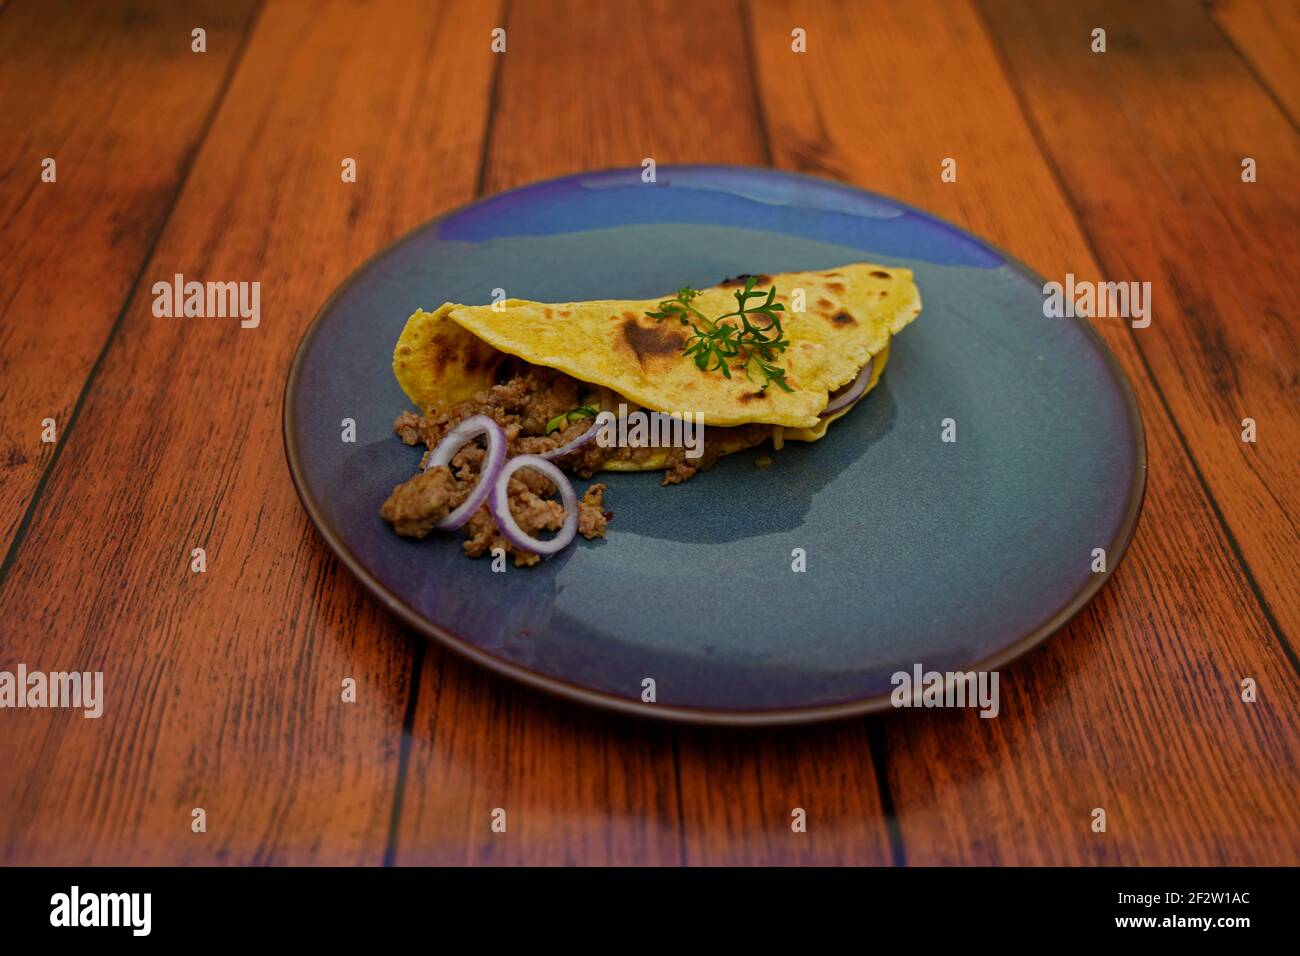 Taco with minced meat avocado onion filling arranged on a plate. Stock Photo